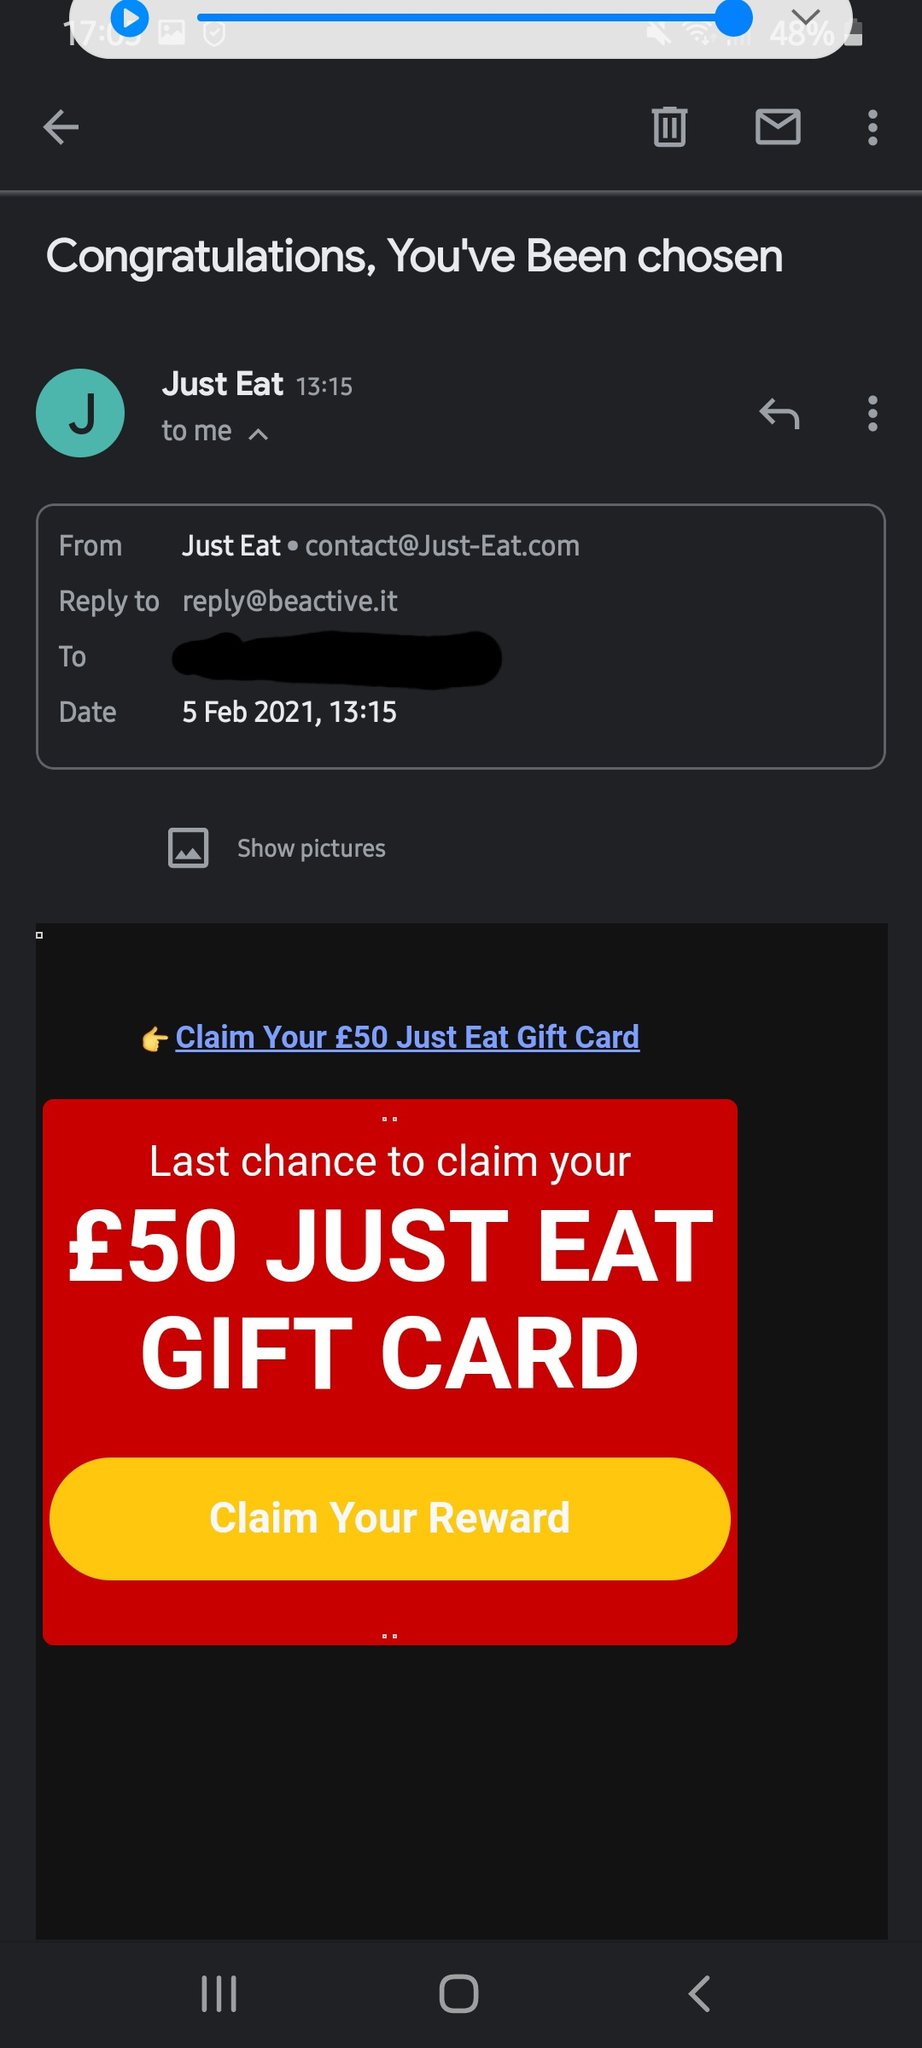 Just Eat phishing email. Source: Twitter